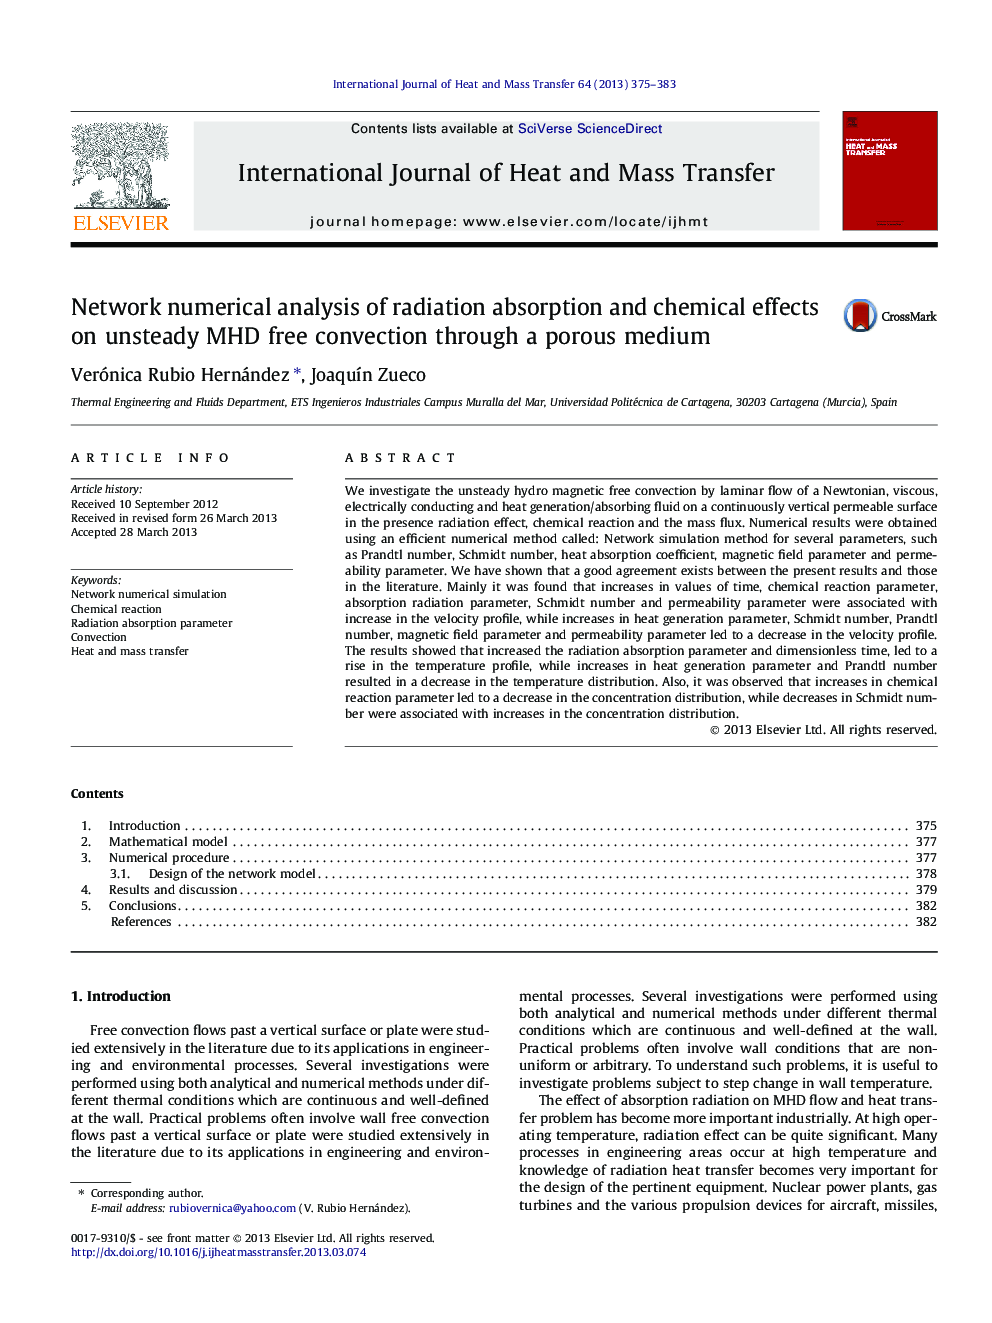 Network numerical analysis of radiation absorption and chemical effects on unsteady MHD free convection through a porous medium